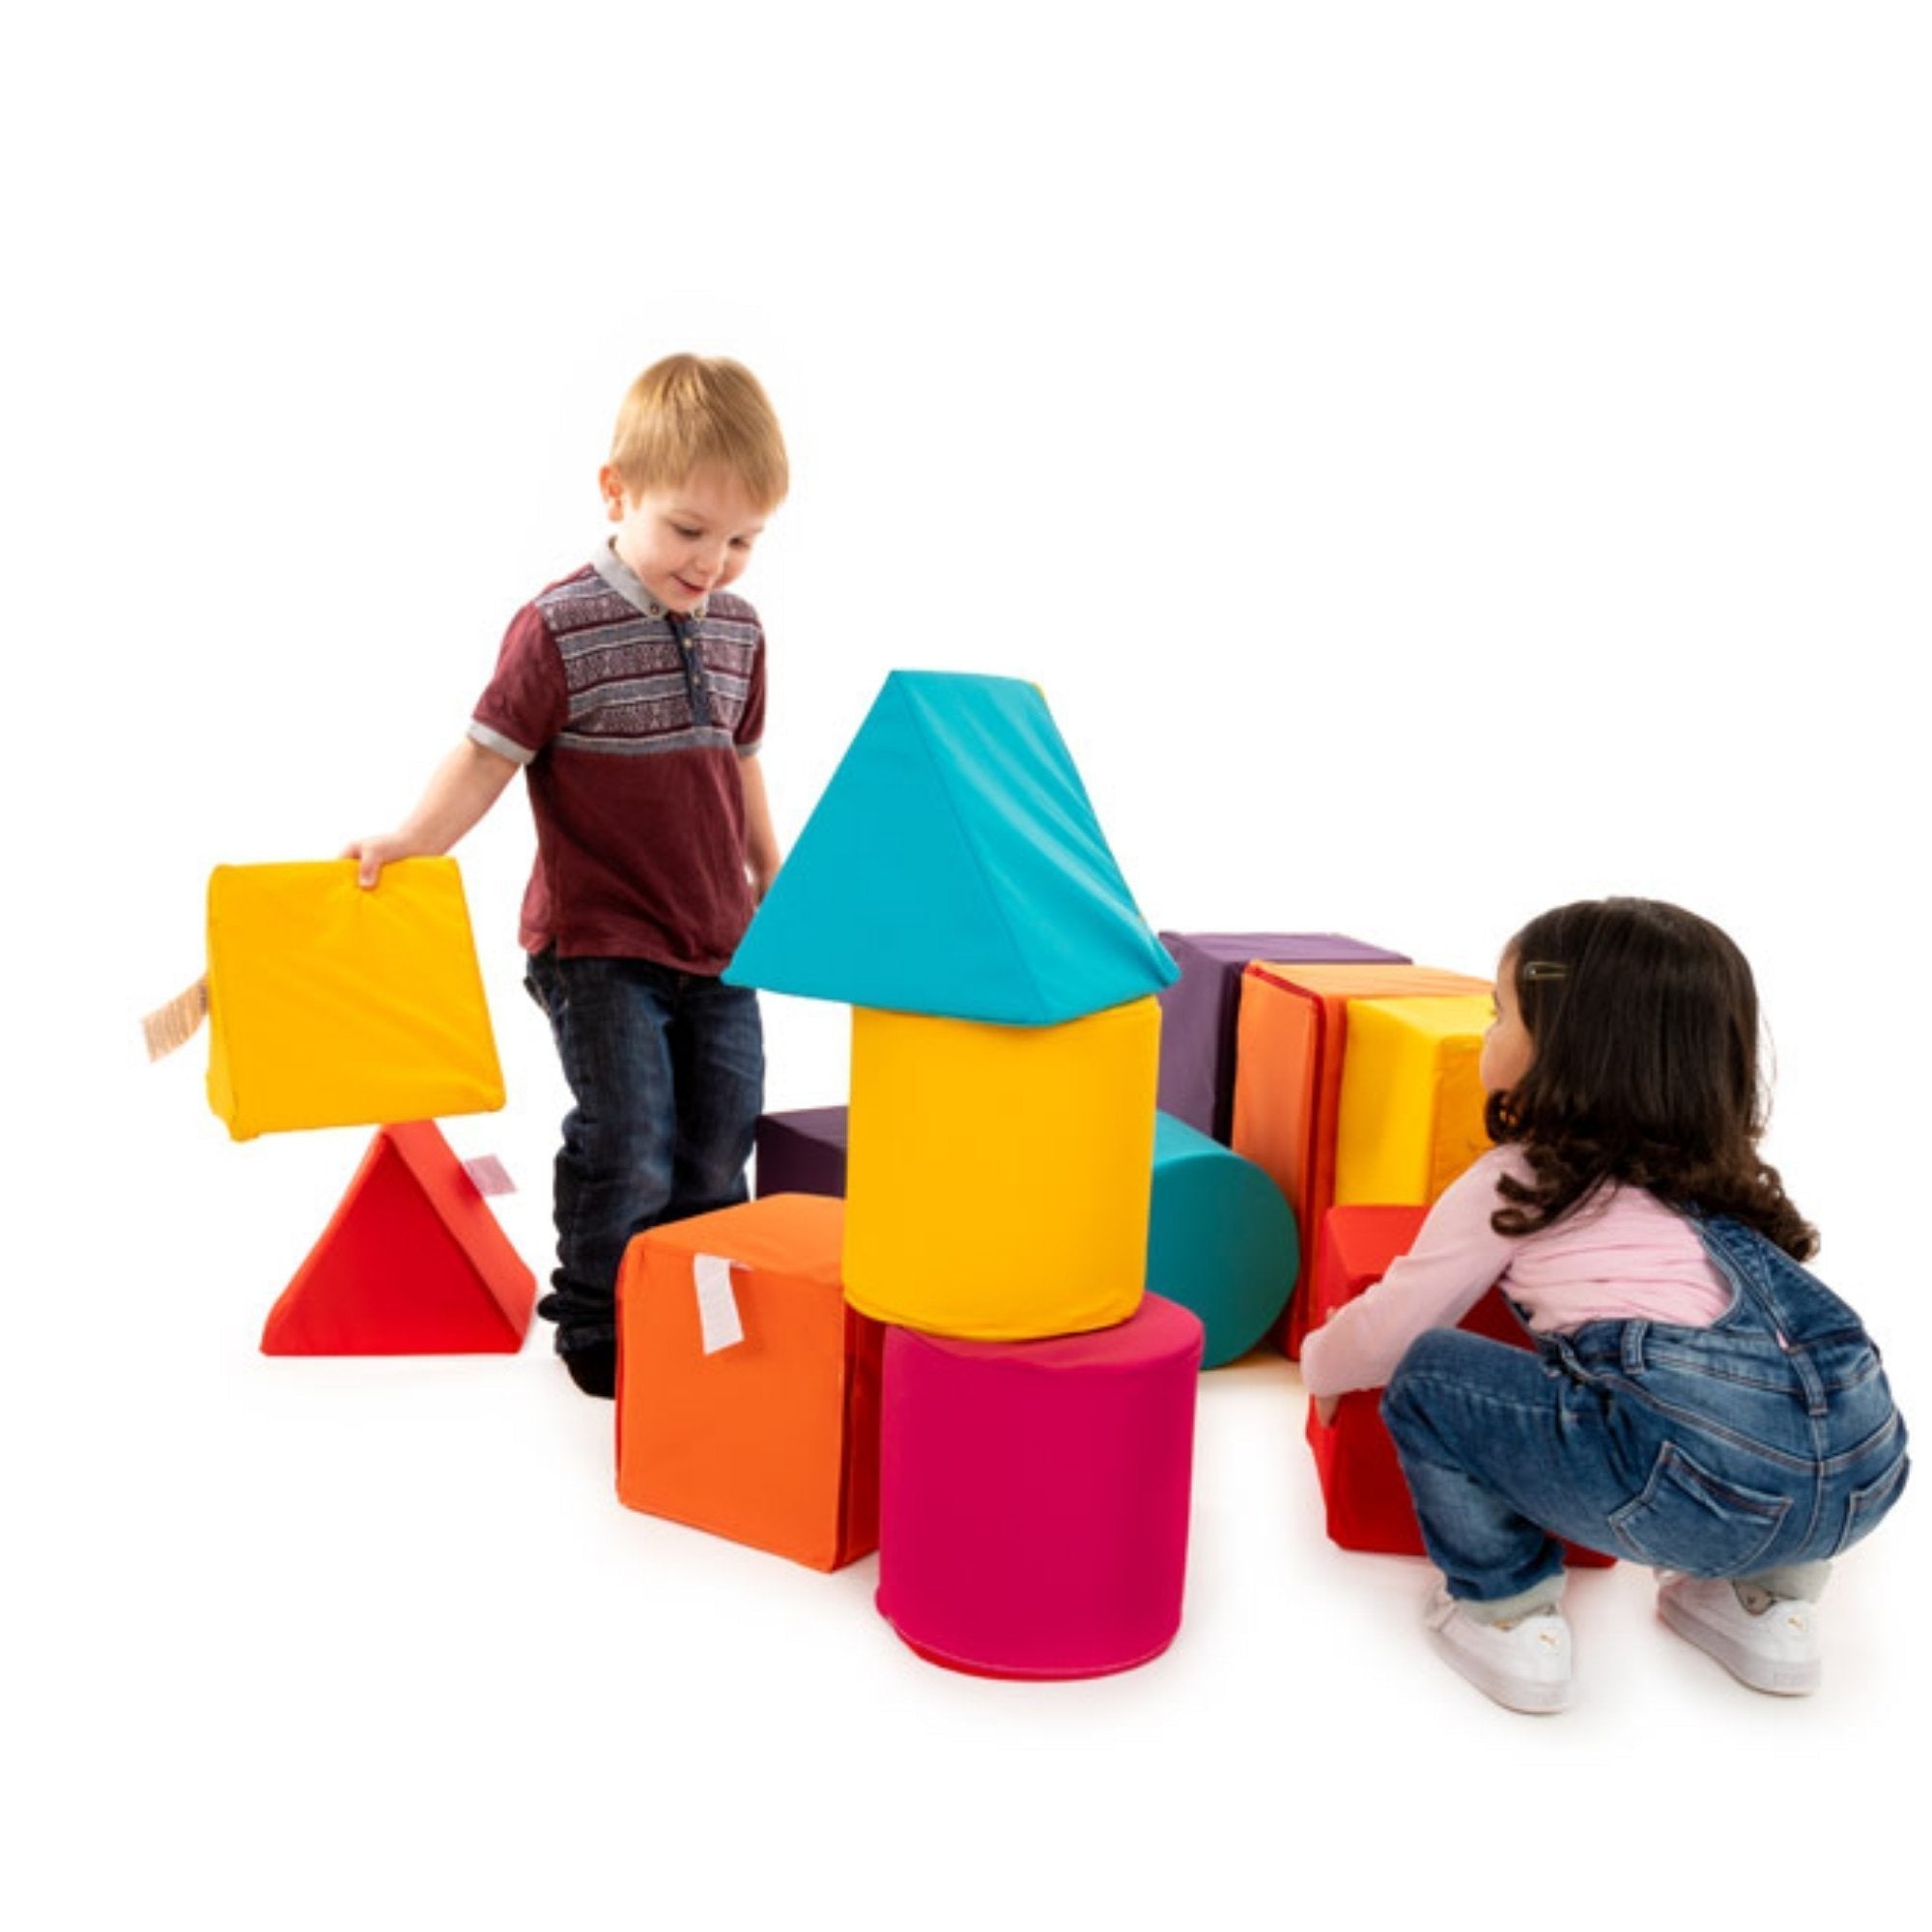 Construction Mini Soft Play Set, This Construction Mini Soft Play Set is a must for any nursery. The Construction Mini Soft Play Set contains square, rectangular, wedge and cylinder shaped blocks in different sizes and colours. As children learn to play with them they develop both basic physical skills and important conceptual skills. The shapes look great and provide limitless fun while stimulating imagination. This Construction Mini Soft Play Set is designed with smaller pieces for younger smaller childre